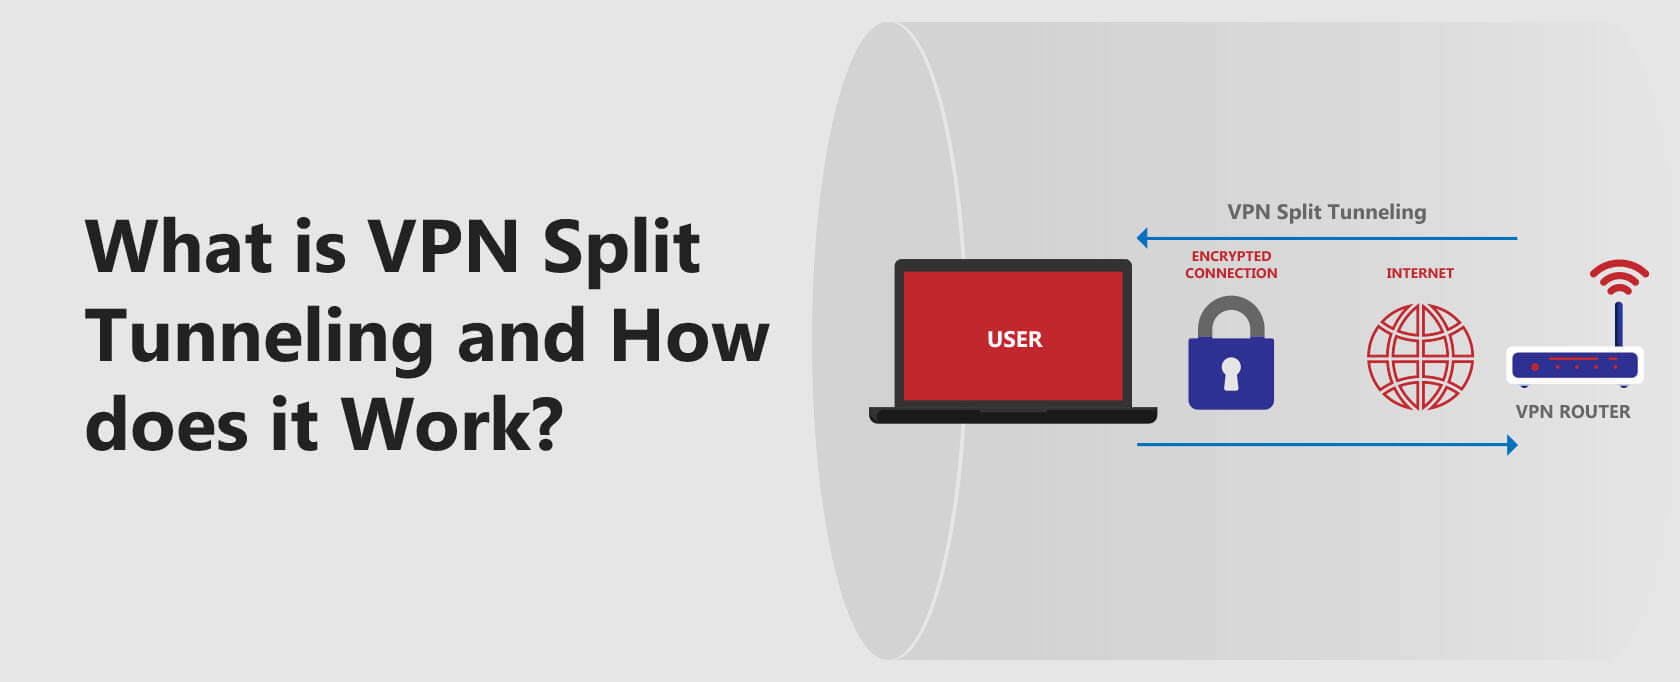 What is VPN Split Tunneling and How does it Work?